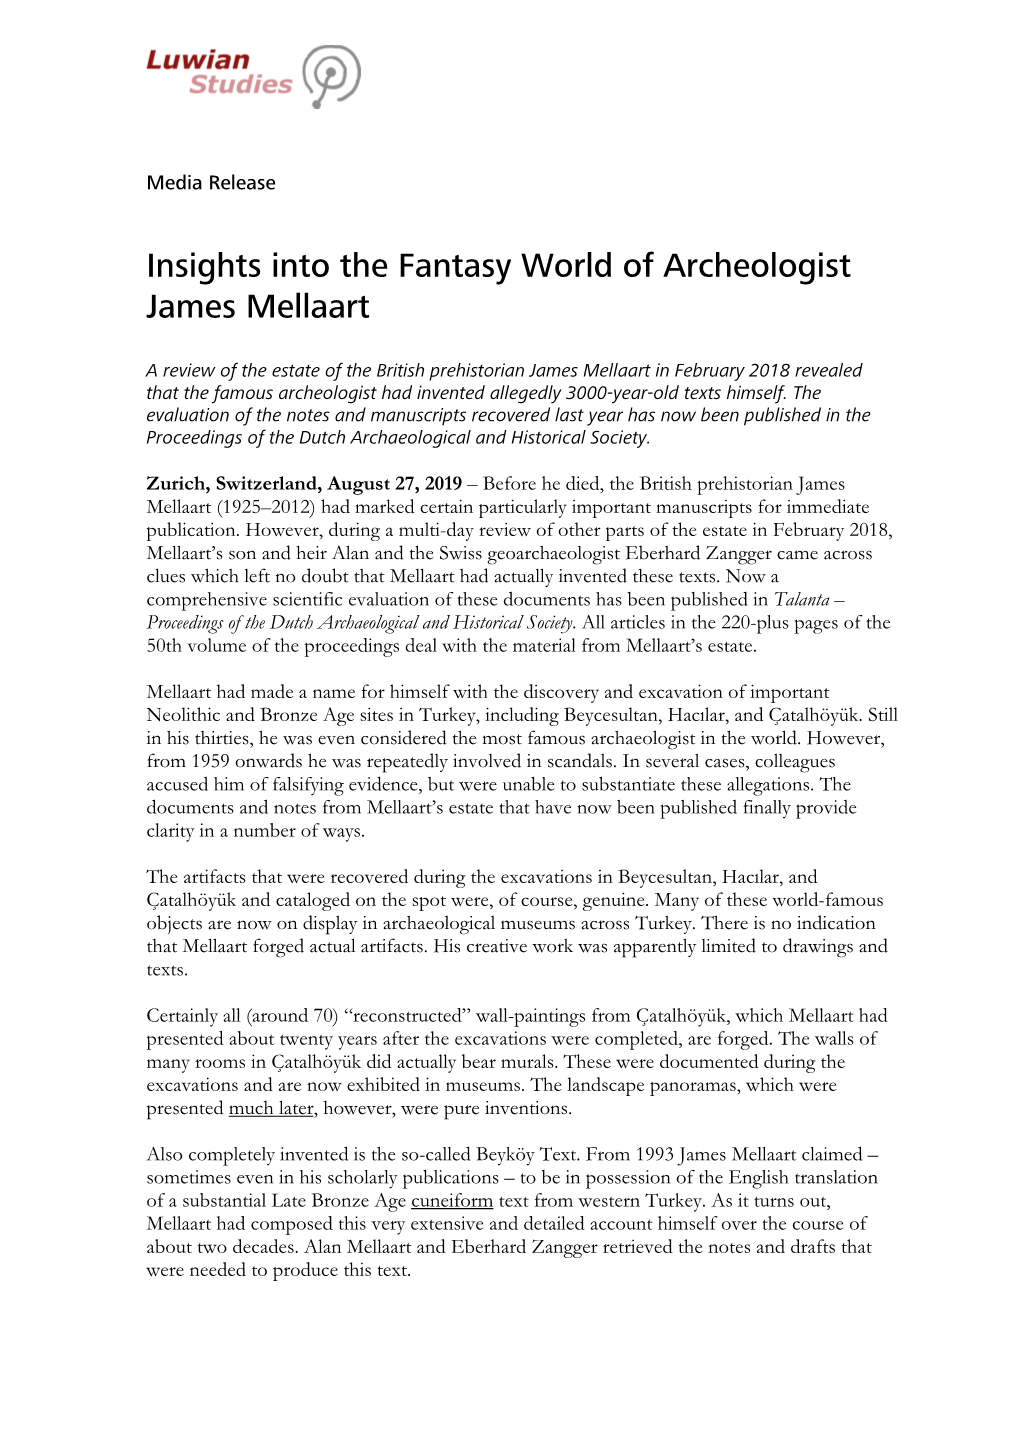 Insights Into the Fantasy World of Archeologist James Mellaart